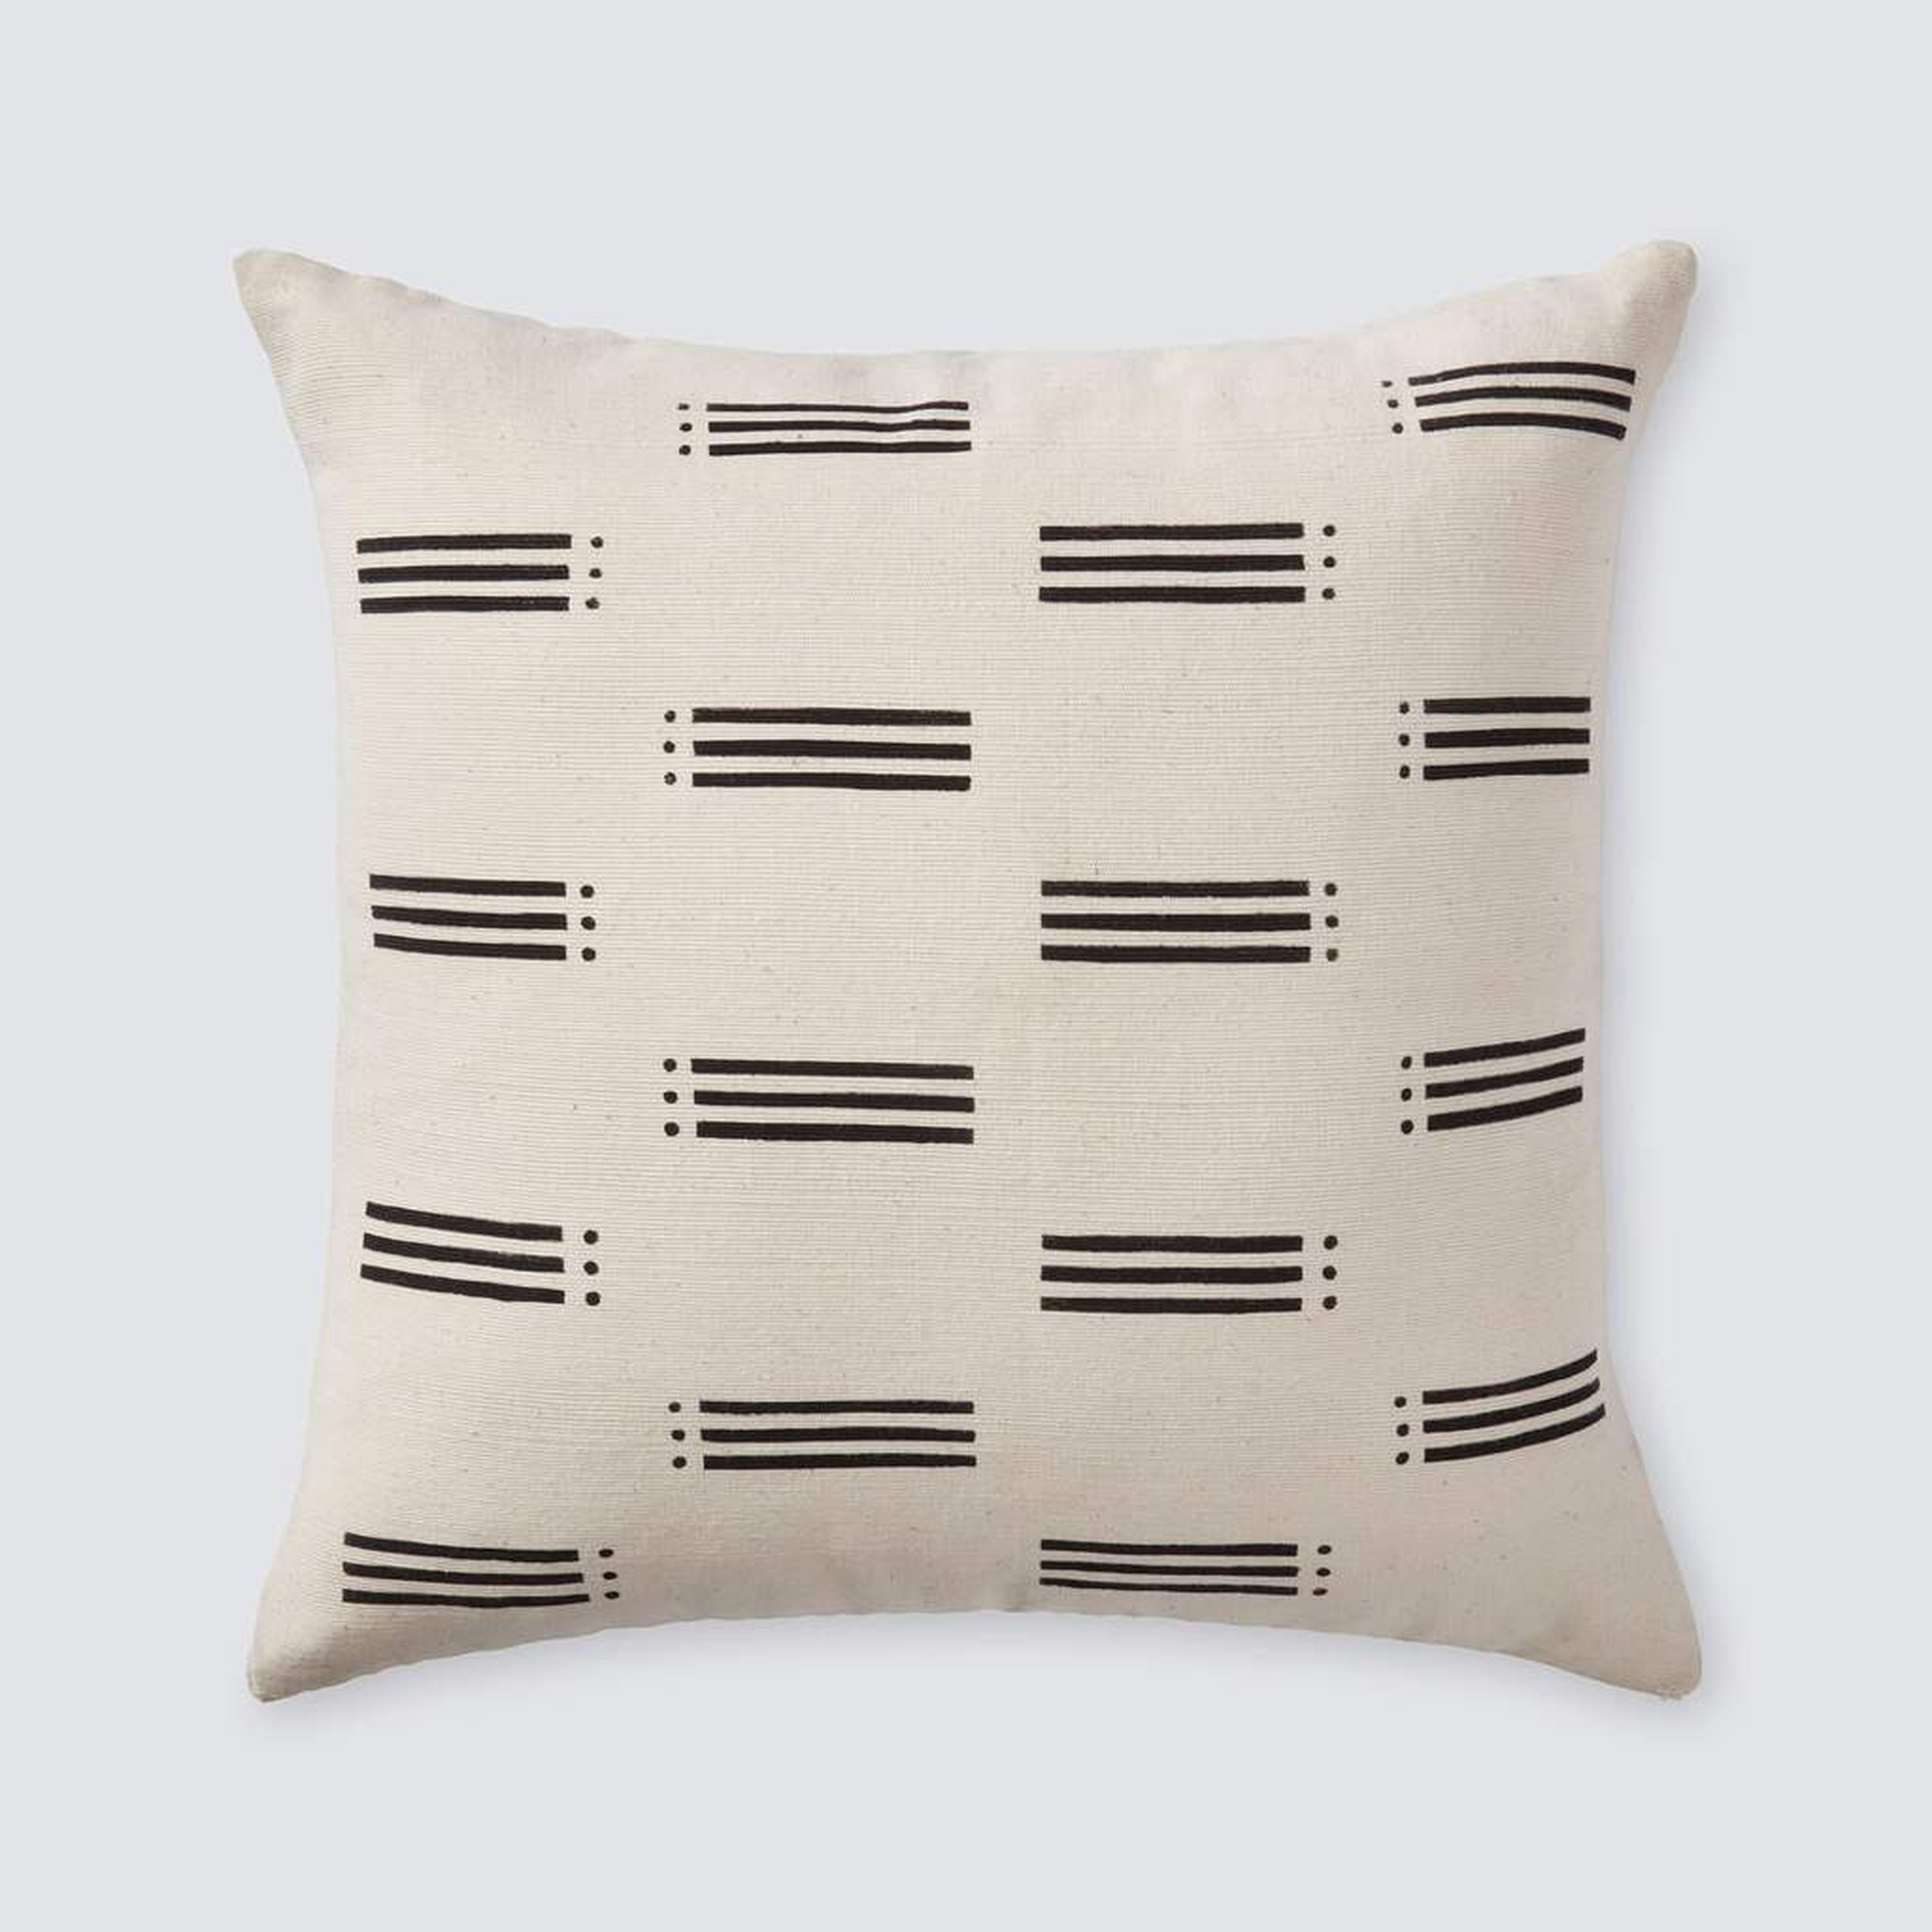 SOLEIL MUD CLOTH PILLOW - The Citizenry